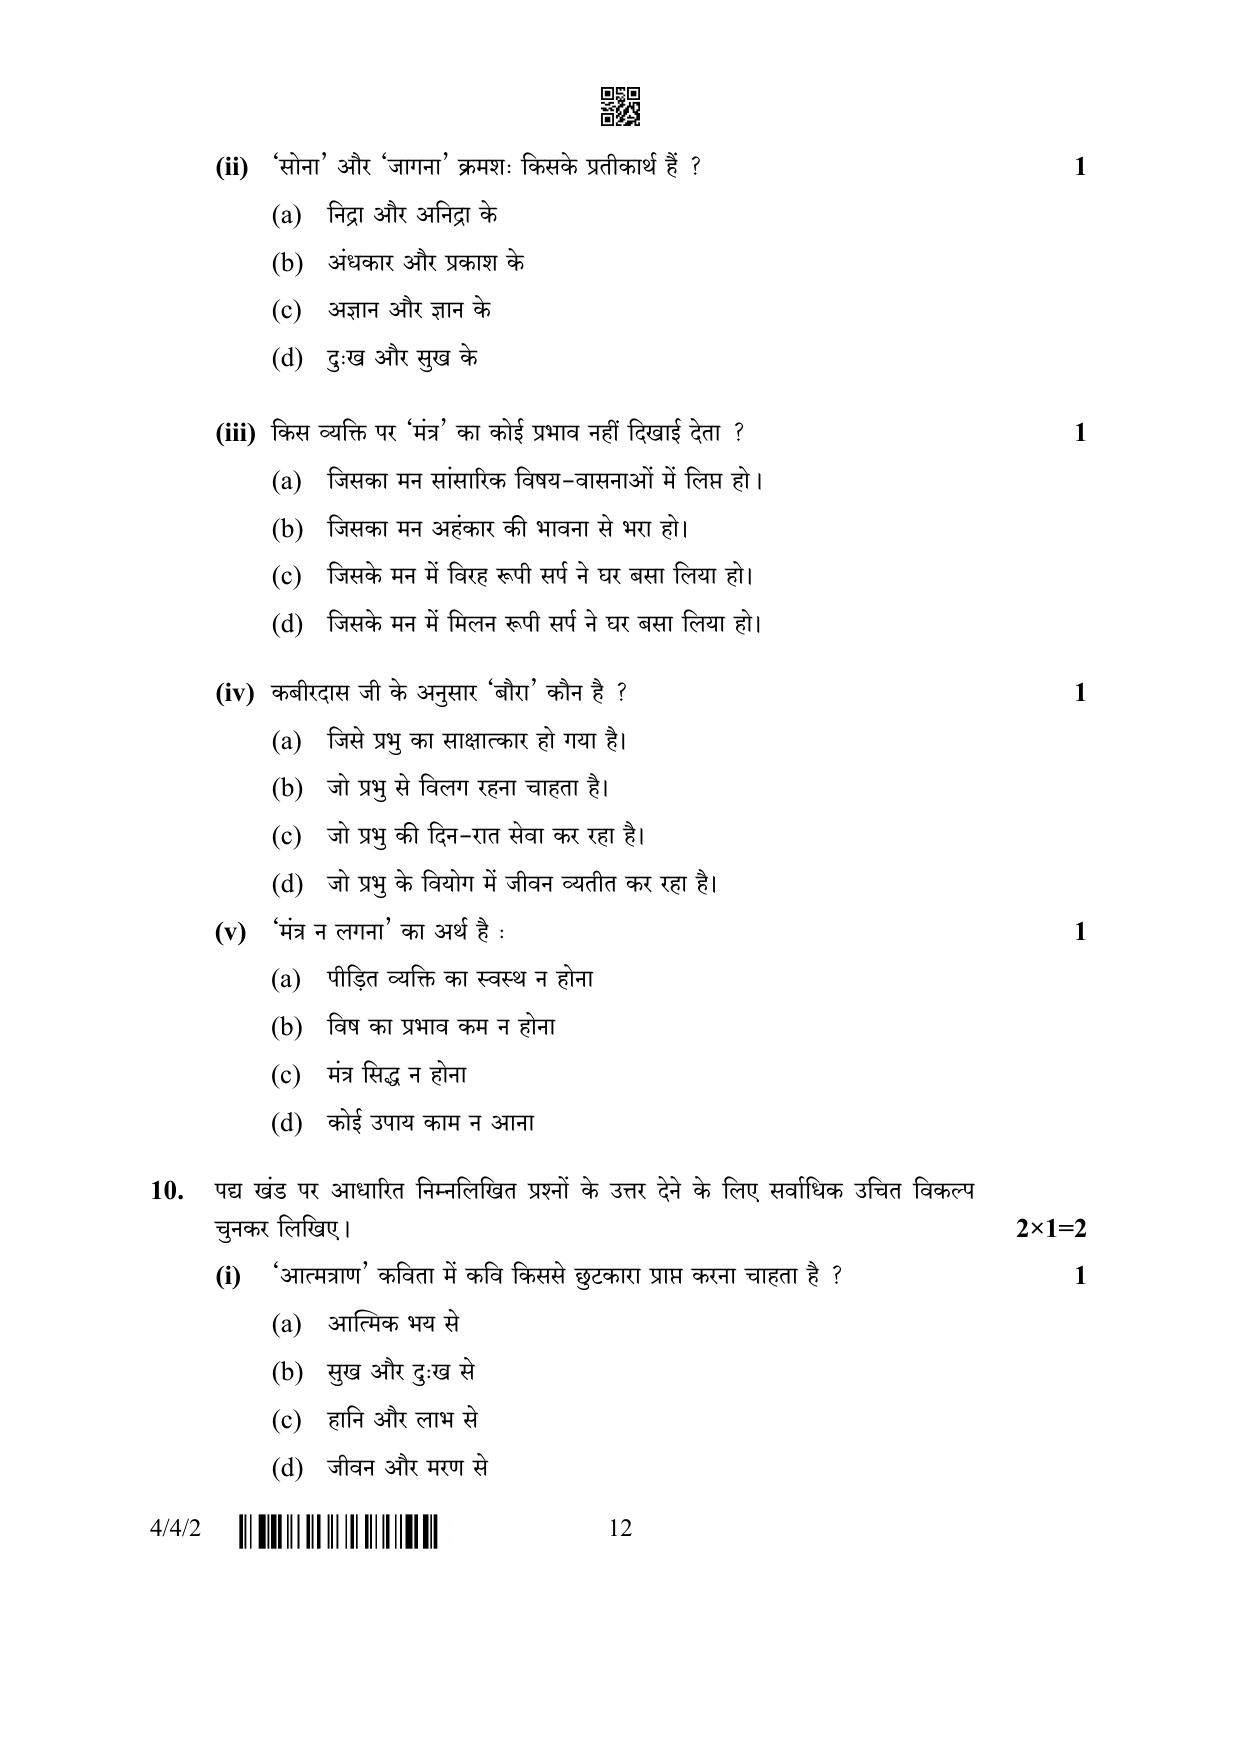 CBSE Class 10 4-4-2 Hindi B 2023 Question Paper - Page 12